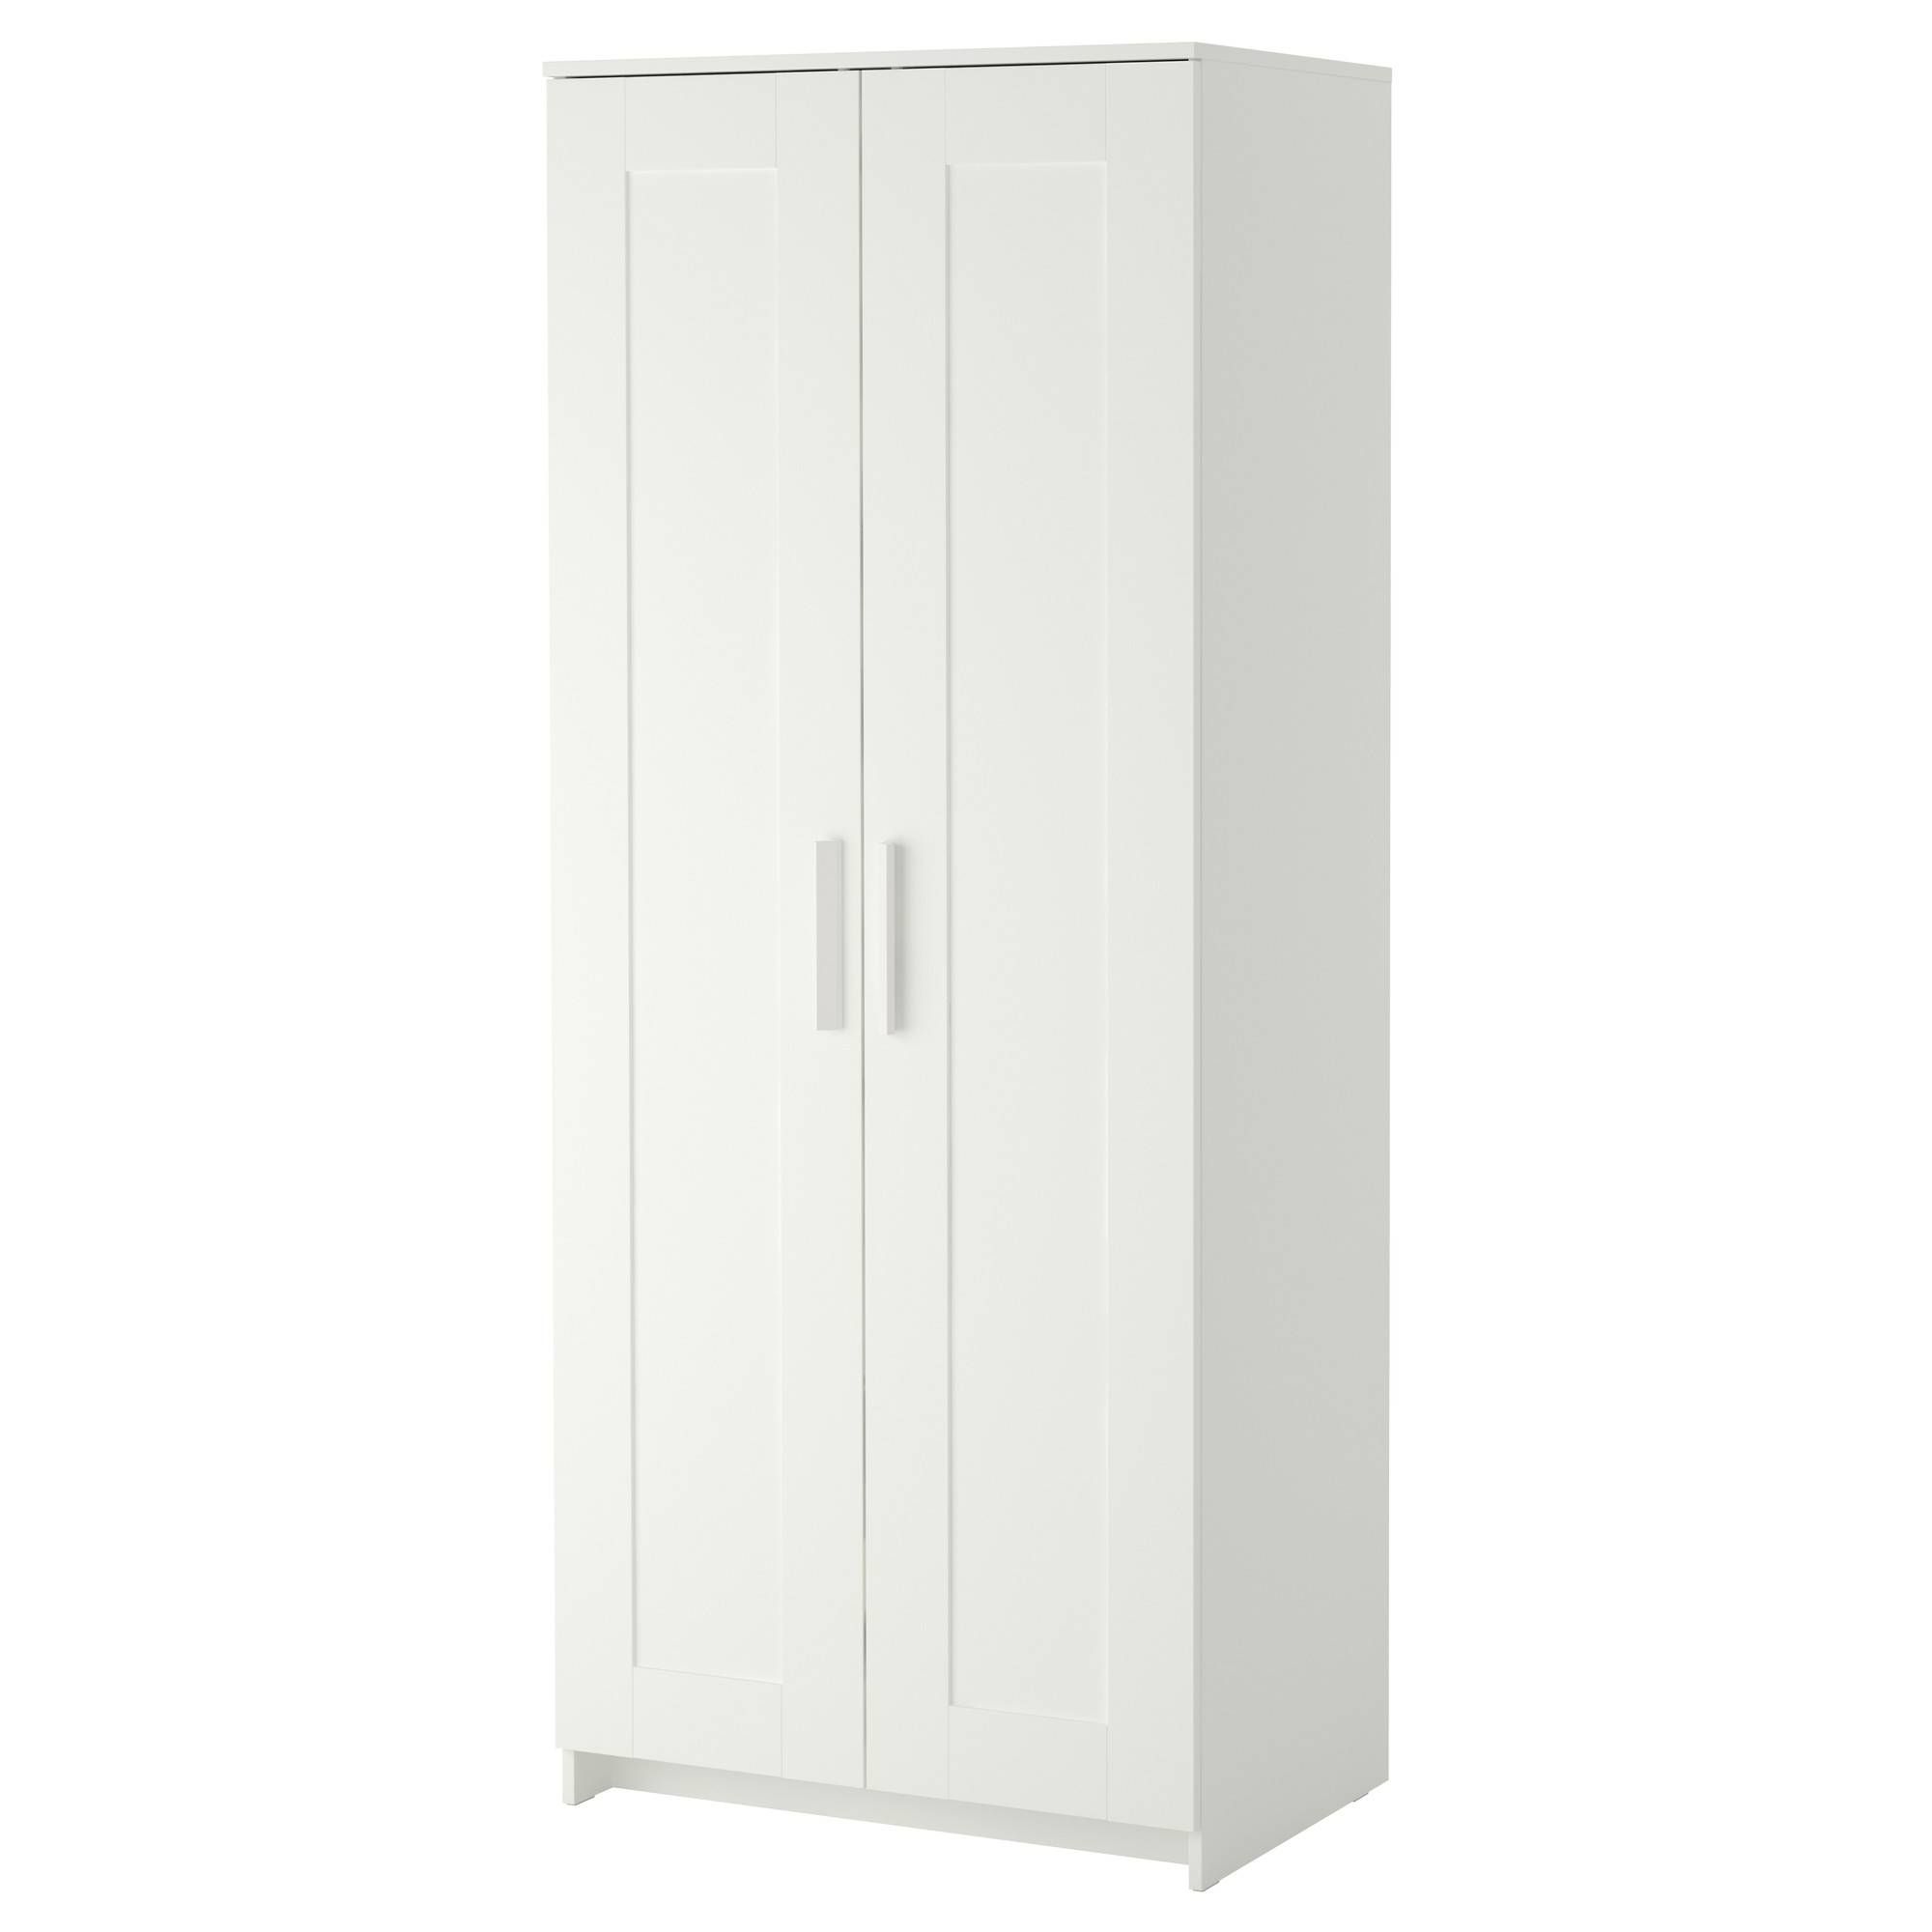 Free Standing Wardrobes | Ikea With White Cheap Wardrobes (View 3 of 15)